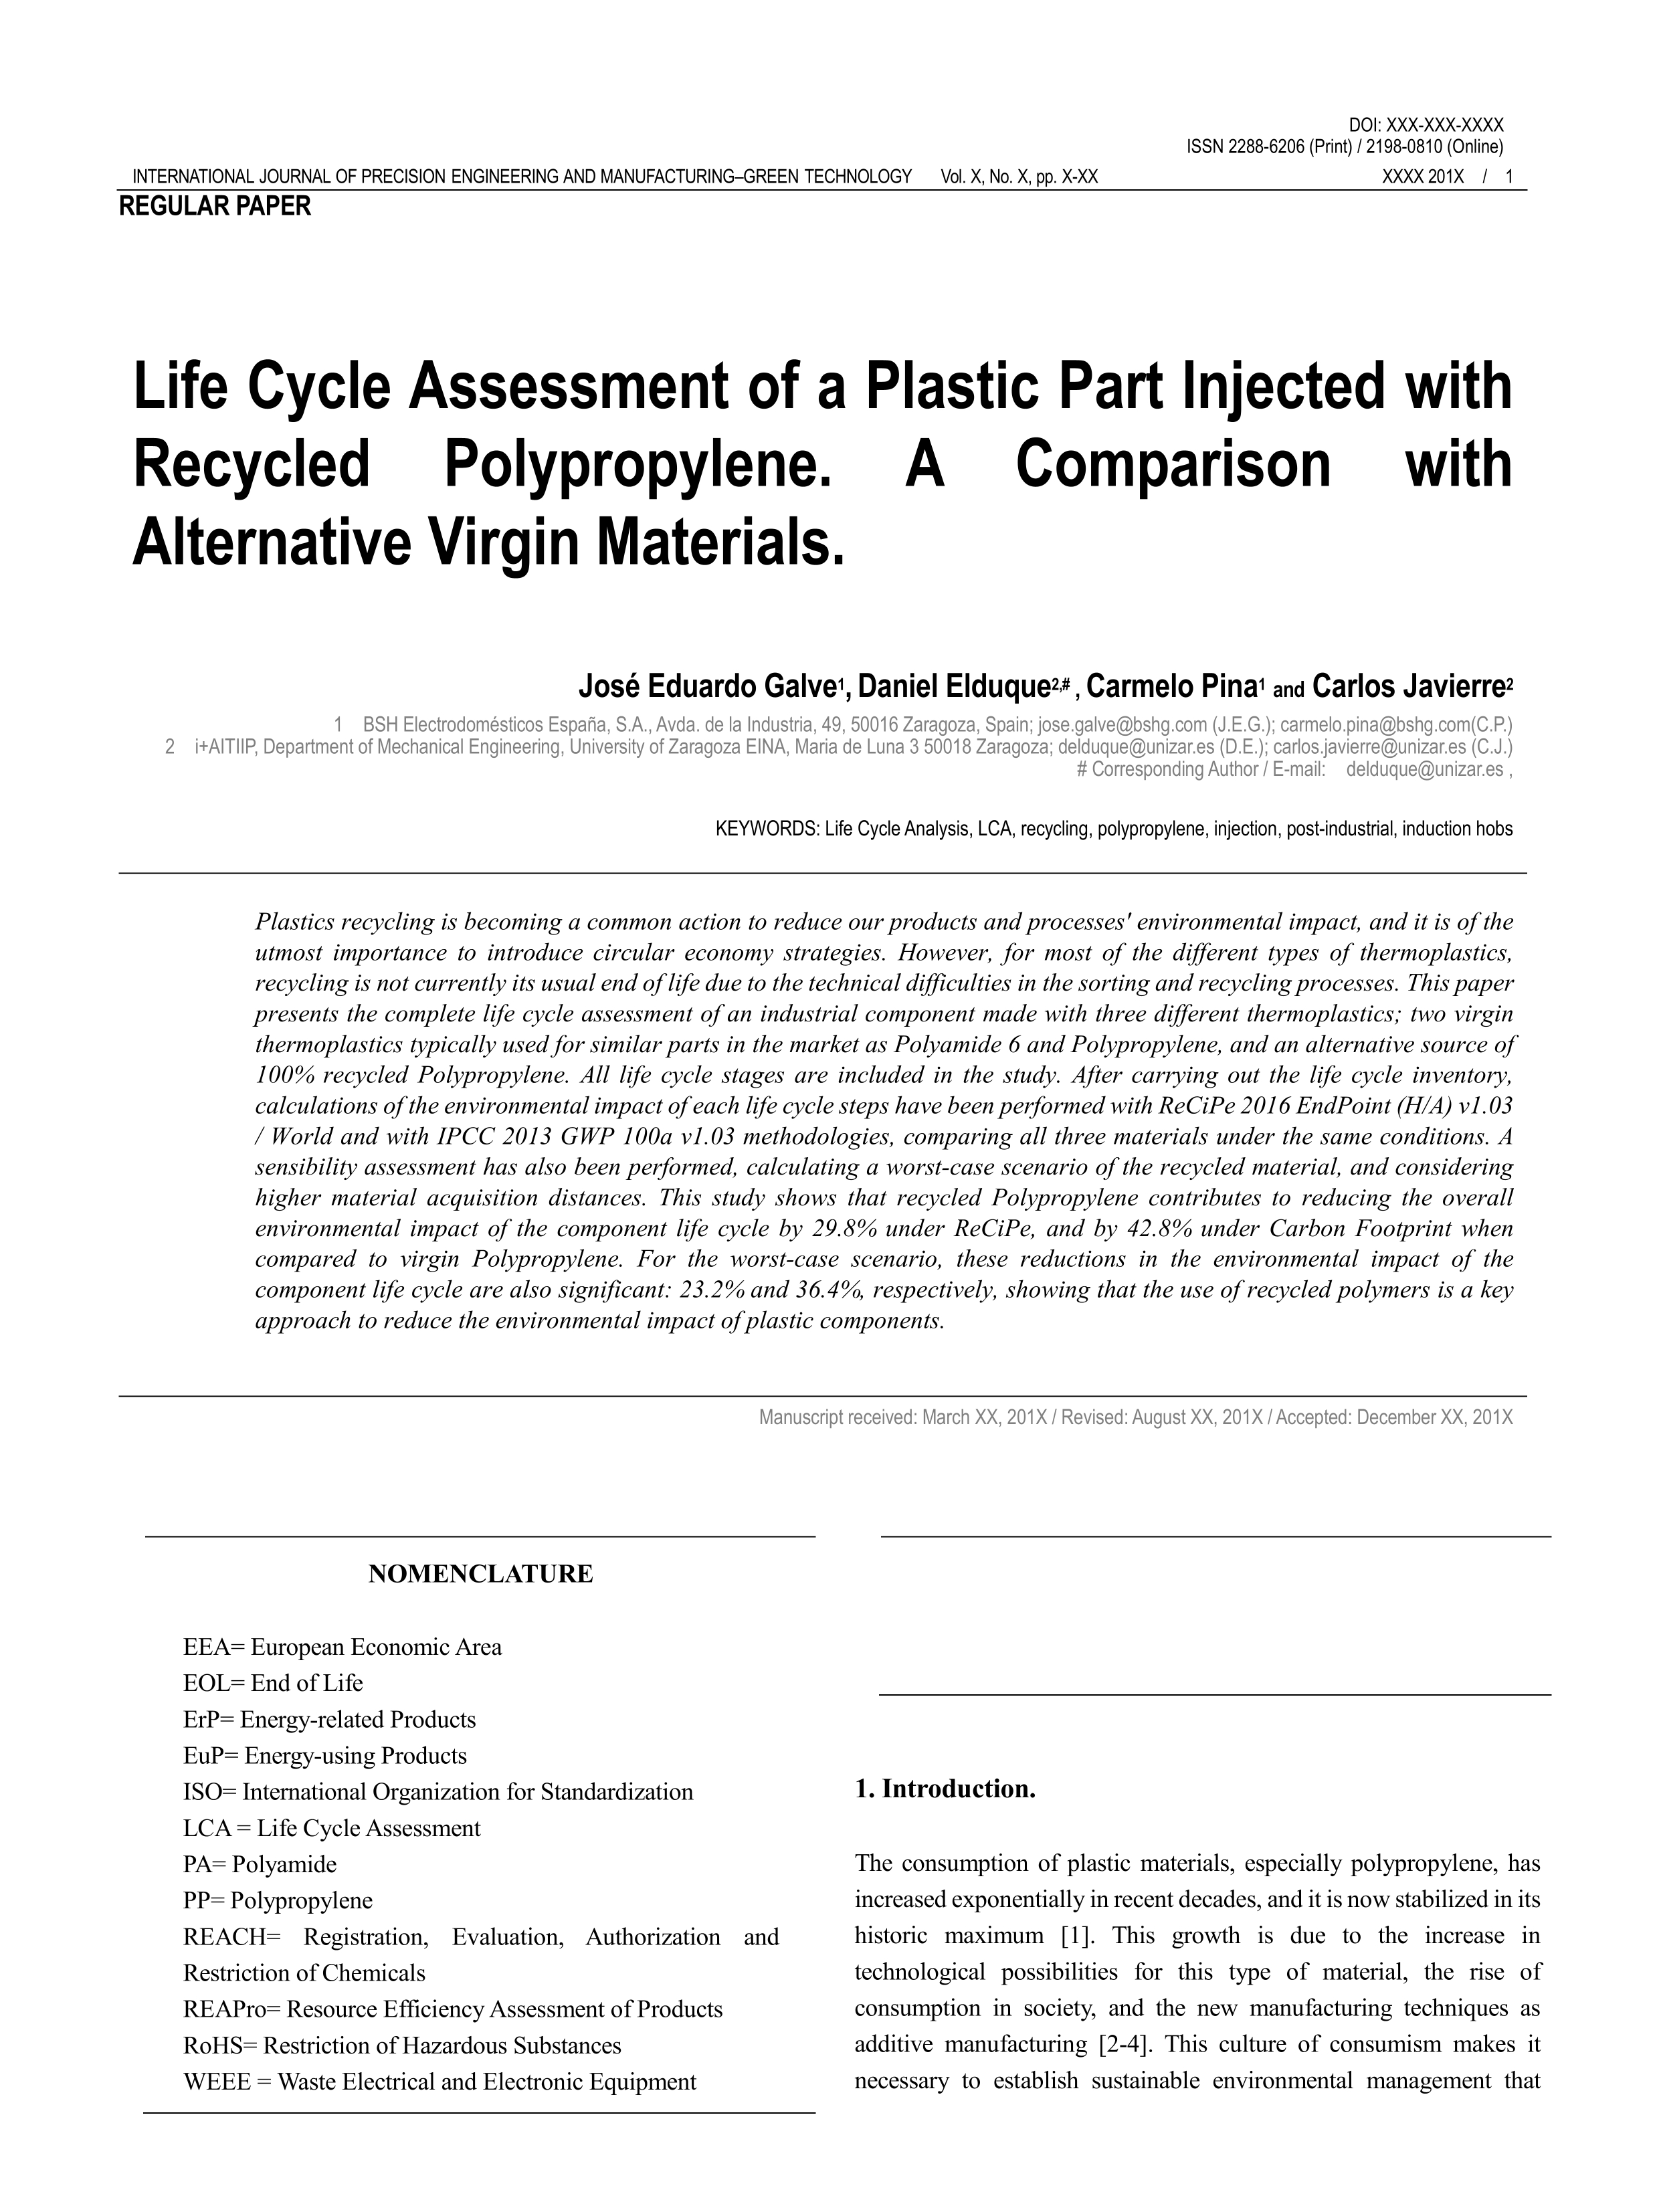 Life cycle assessment of a plastic part injected with recycled Polypropylene: a comparison with alternative virgin materials